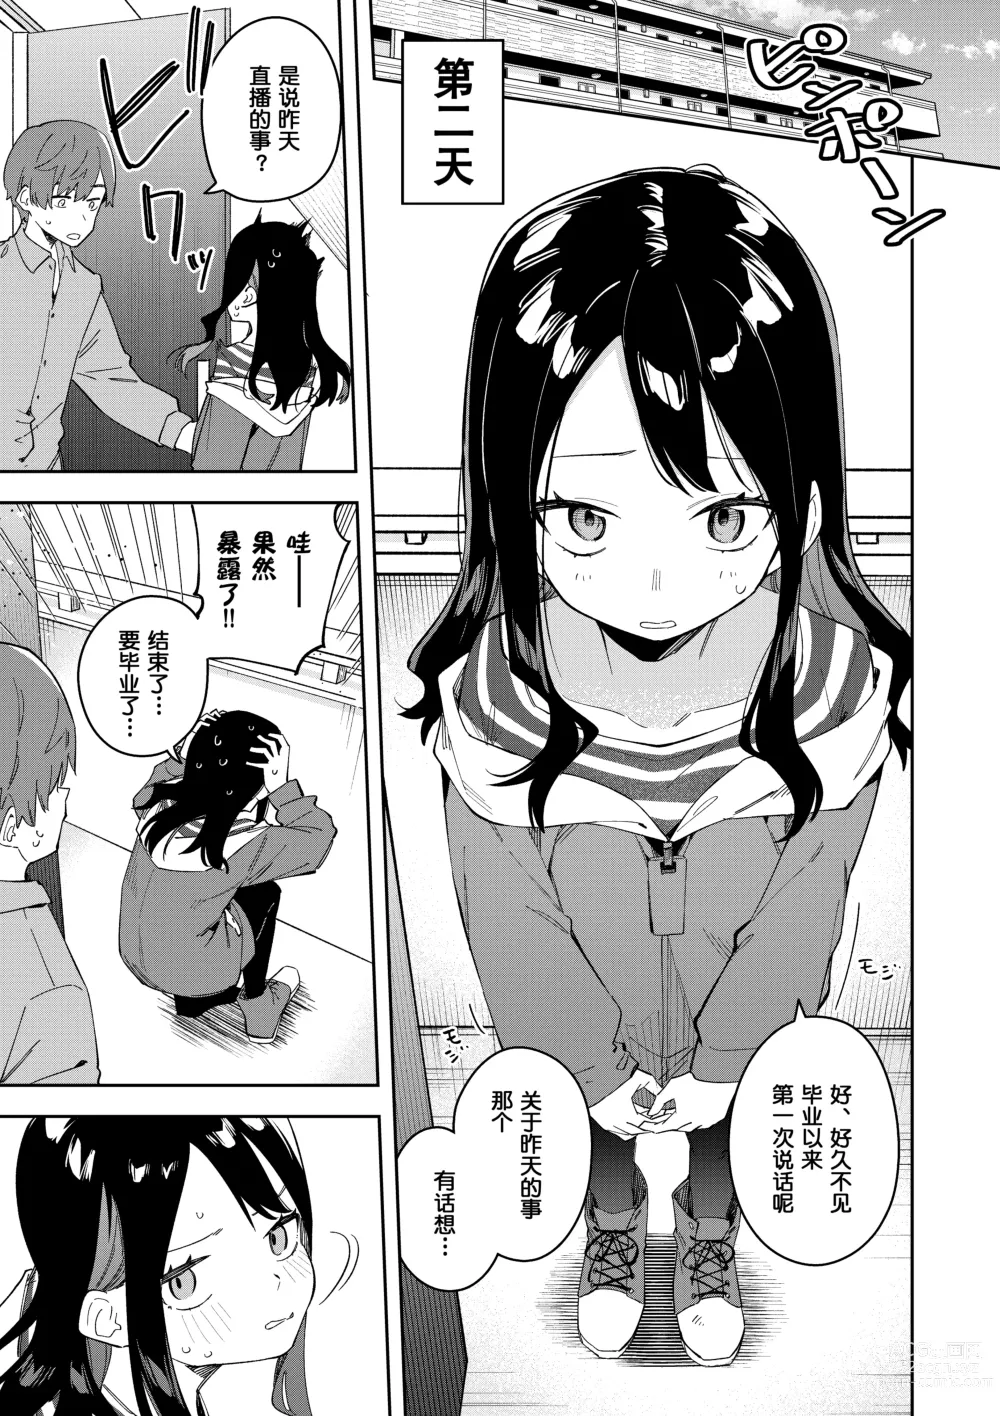 Page 7 of doujinshi 隣人は有名配信者3人目